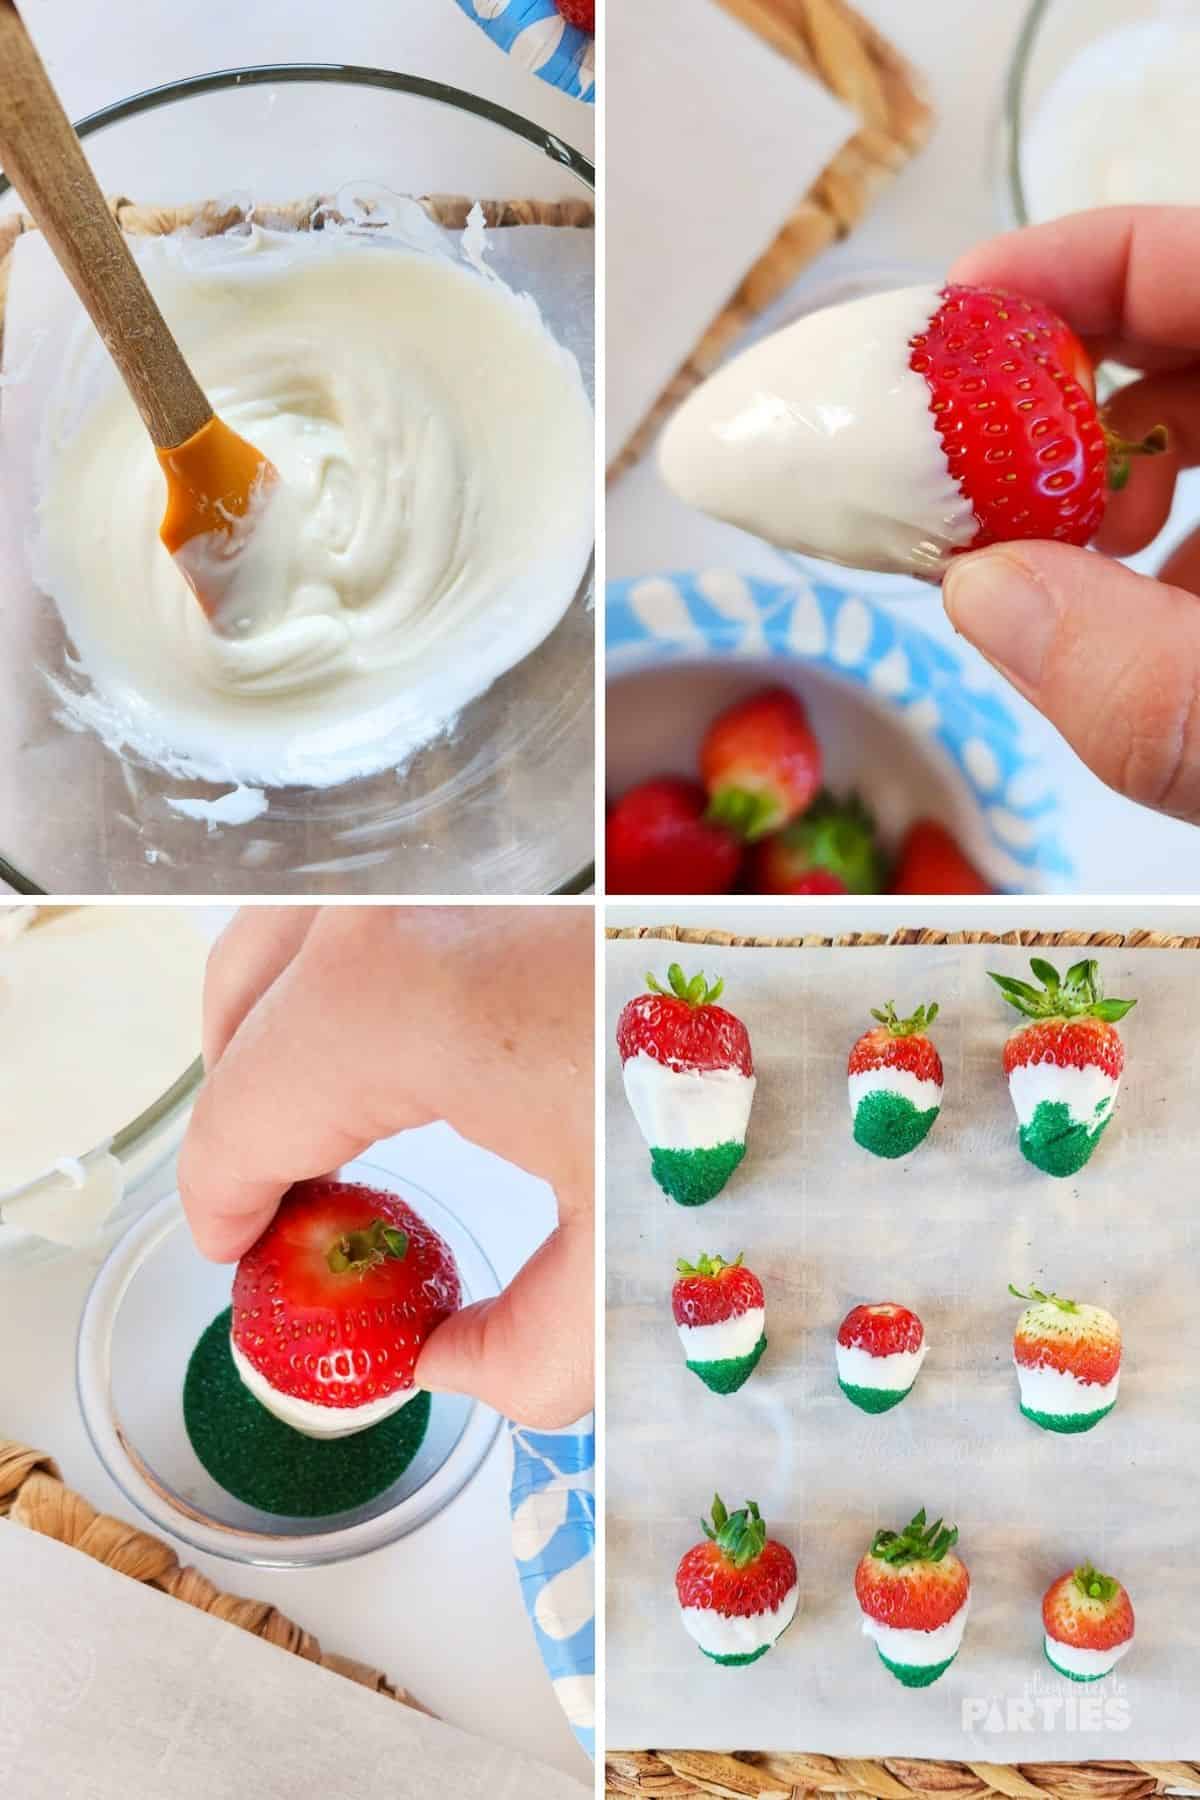 How to make chocolate dipped strawberries with sprinkles.